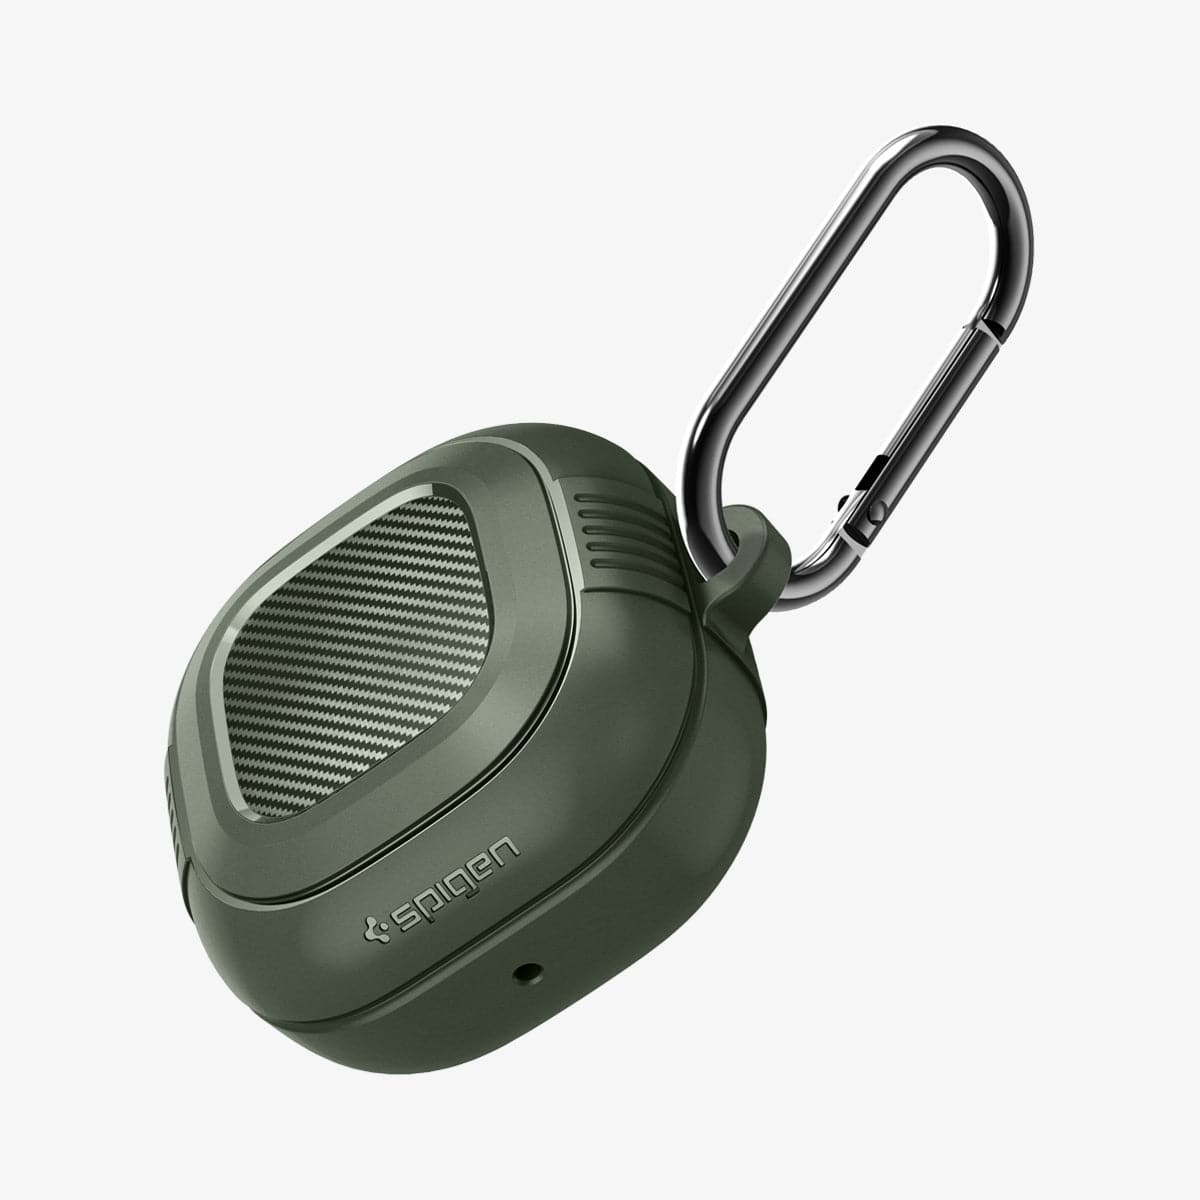 ASD02474 - Galaxy Buds 2 Pro / 2 / Pro / Live Case Rugged Armor in military green showing the top, front and carabiner